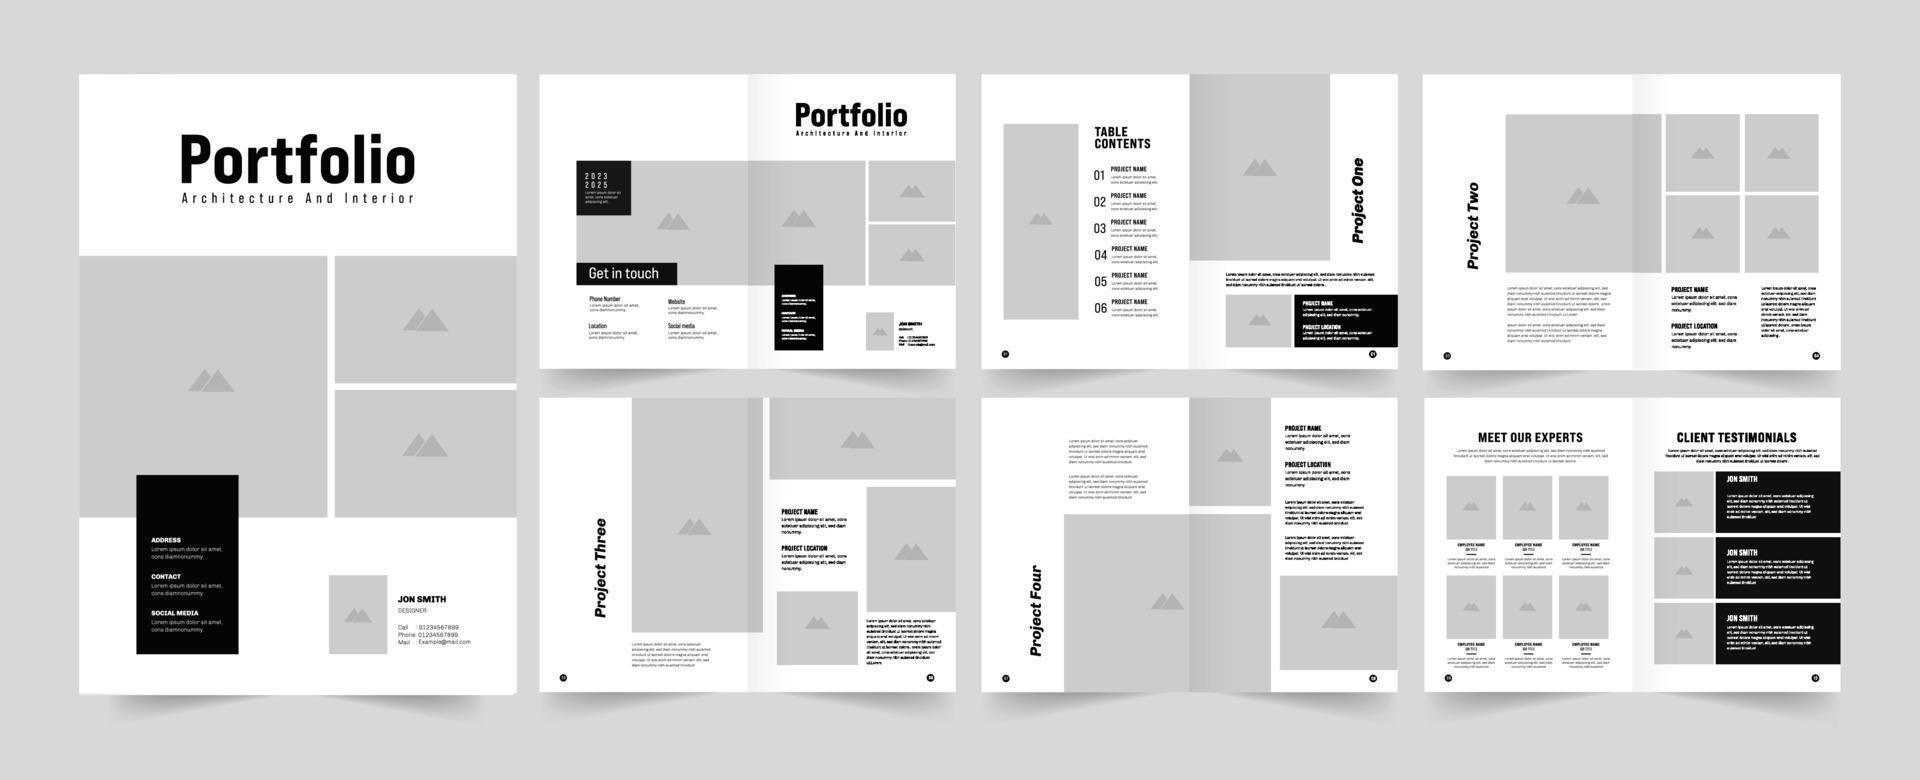 portefeuille ontwerp of architectuur portefeuille lay-out ontwerp vector